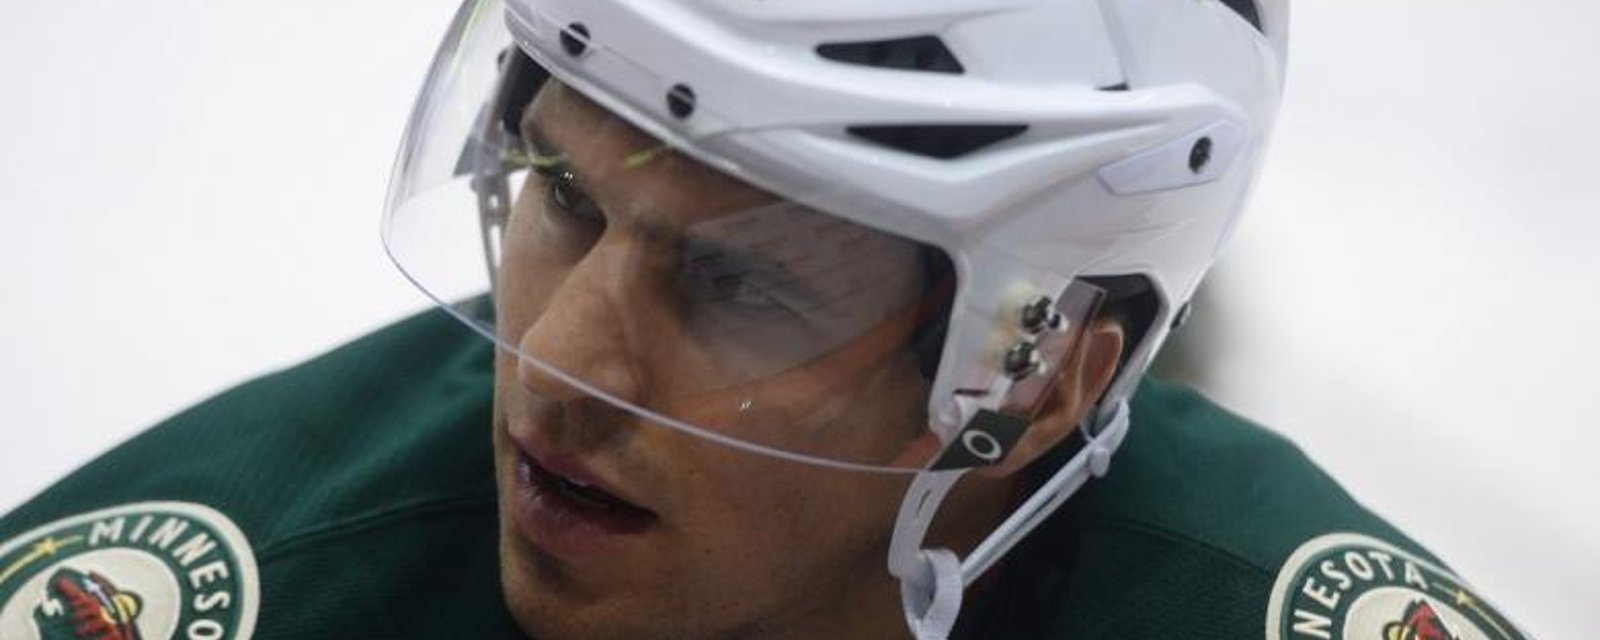 Signs of problems for Wild star Zach Parise.